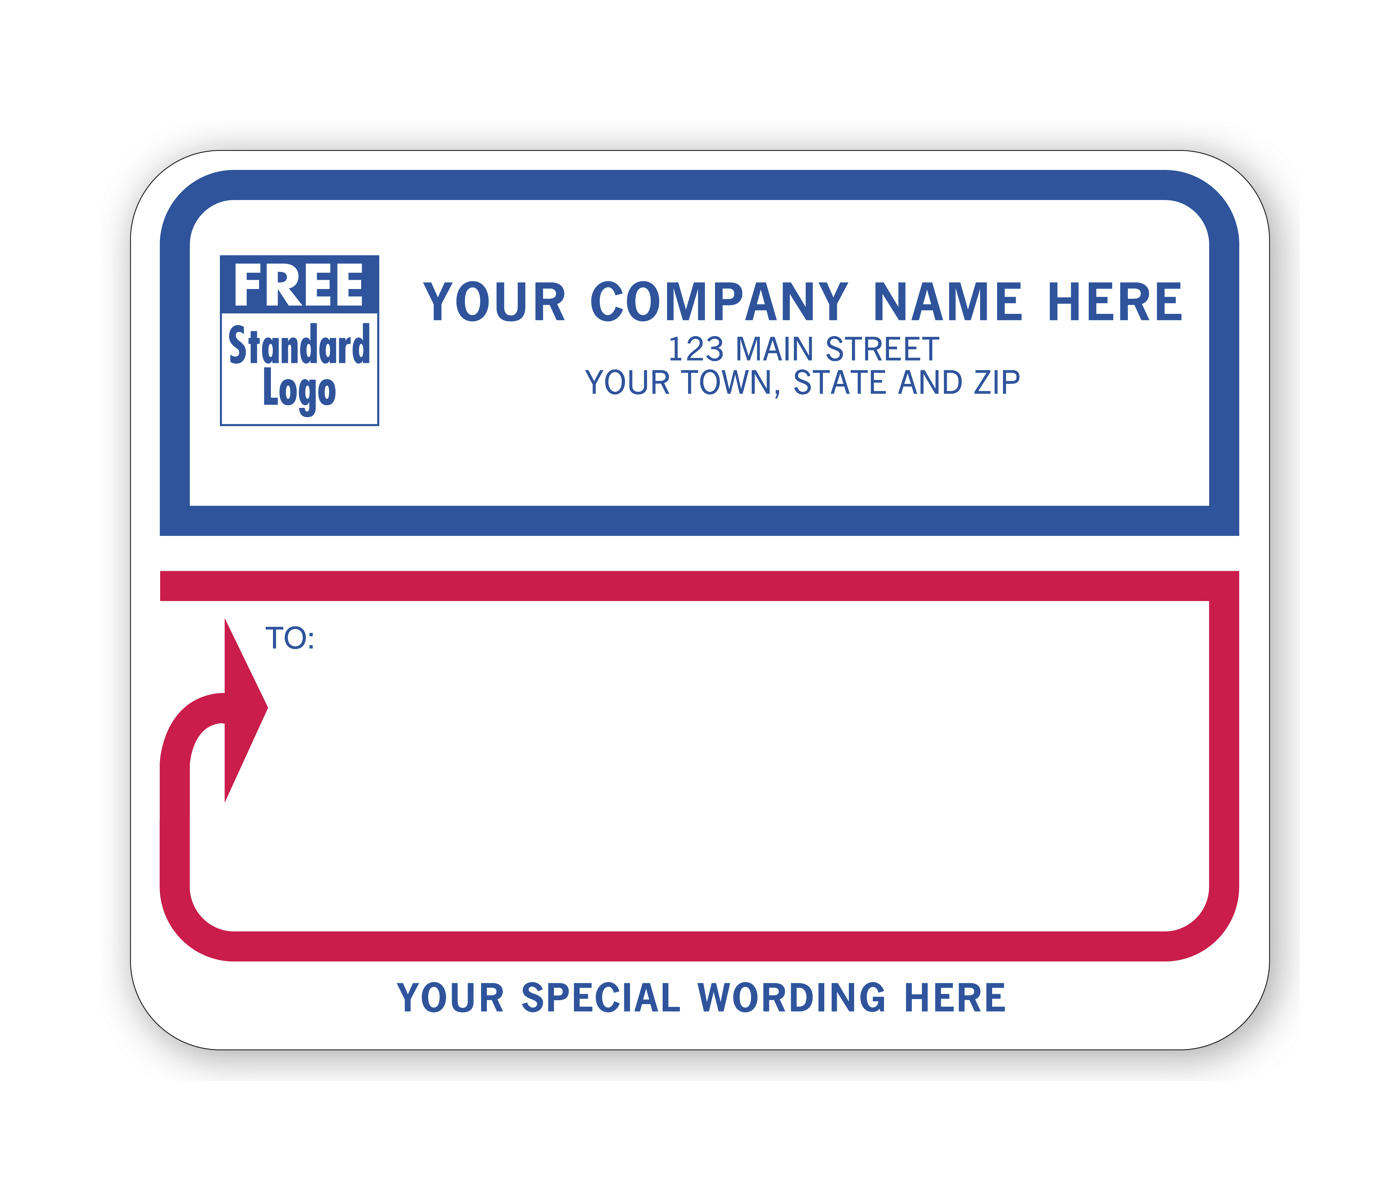 Jumbo Mailing Labels, Padded, White with Blue/Red Border